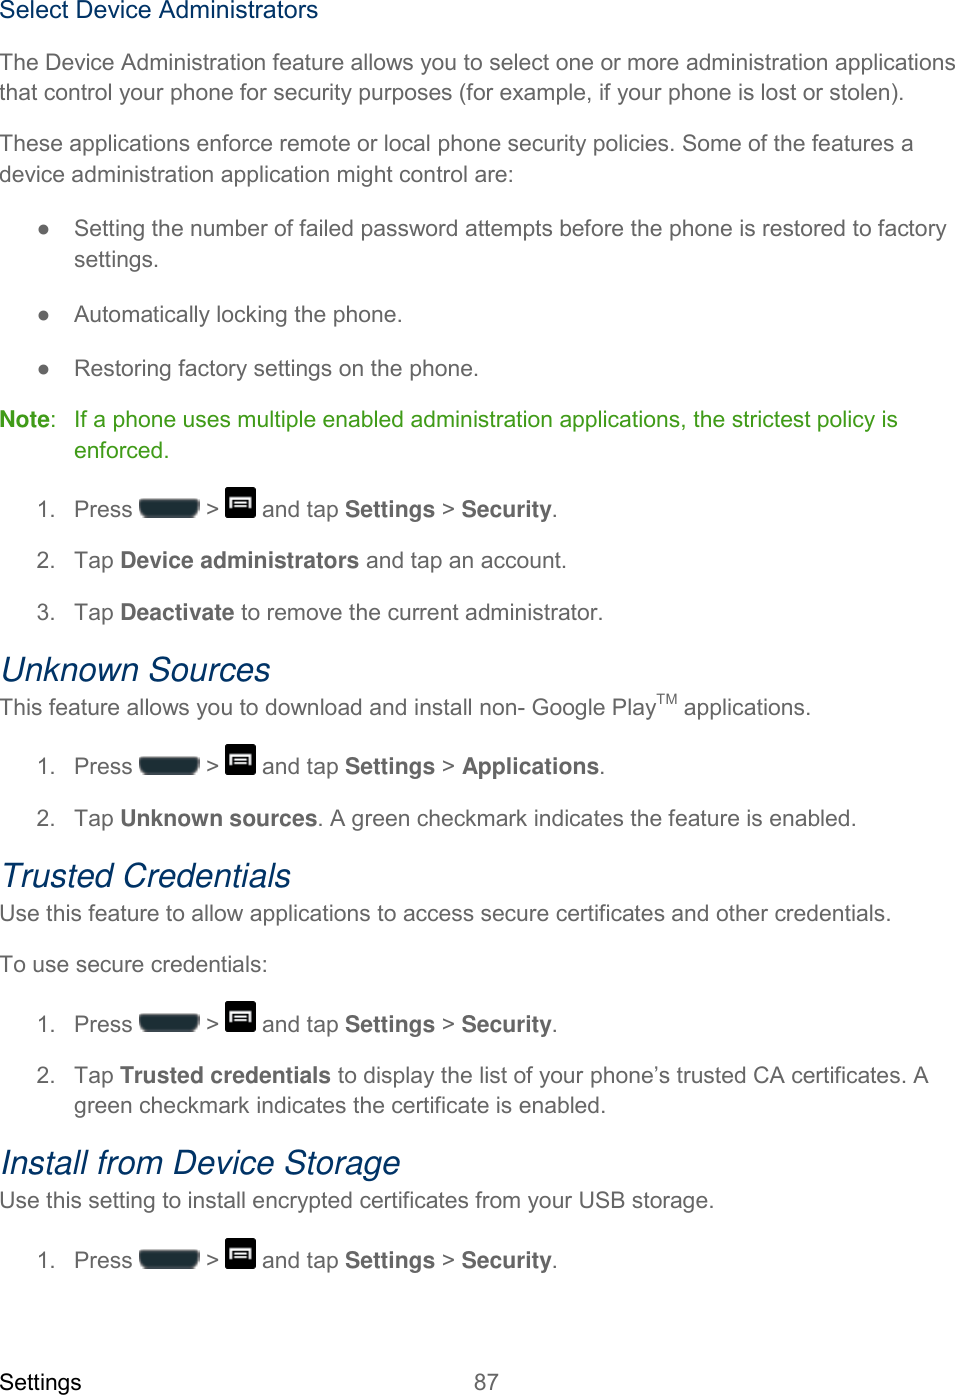 Settings 87   Select Device Administrators The Device Administration feature allows you to select one or more administration applications that control your phone for security purposes (for example, if your phone is lost or stolen). These applications enforce remote or local phone security policies. Some of the features a device administration application might control are: ●  Setting the number of failed password attempts before the phone is restored to factory settings. ●  Automatically locking the phone. ●  Restoring factory settings on the phone. Note:   If a phone uses multiple enabled administration applications, the strictest policy is enforced. 1.  Press   &gt;   and tap Settings &gt; Security. 2.  Tap Device administrators and tap an account. 3.  Tap Deactivate to remove the current administrator.  Unknown Sources This feature allows you to download and install non- Google PlayTM applications. 1.  Press   &gt;   and tap Settings &gt; Applications. 2.  Tap Unknown sources. A green checkmark indicates the feature is enabled. Trusted Credentials Use this feature to allow applications to access secure certificates and other credentials. To use secure credentials: 1.  Press   &gt;   and tap Settings &gt; Security. 2.  Tap Trusted credentials to display the list of your phone’s trusted CA certificates. A green checkmark indicates the certificate is enabled. Install from Device Storage Use this setting to install encrypted certificates from your USB storage. 1.  Press   &gt;   and tap Settings &gt; Security. 